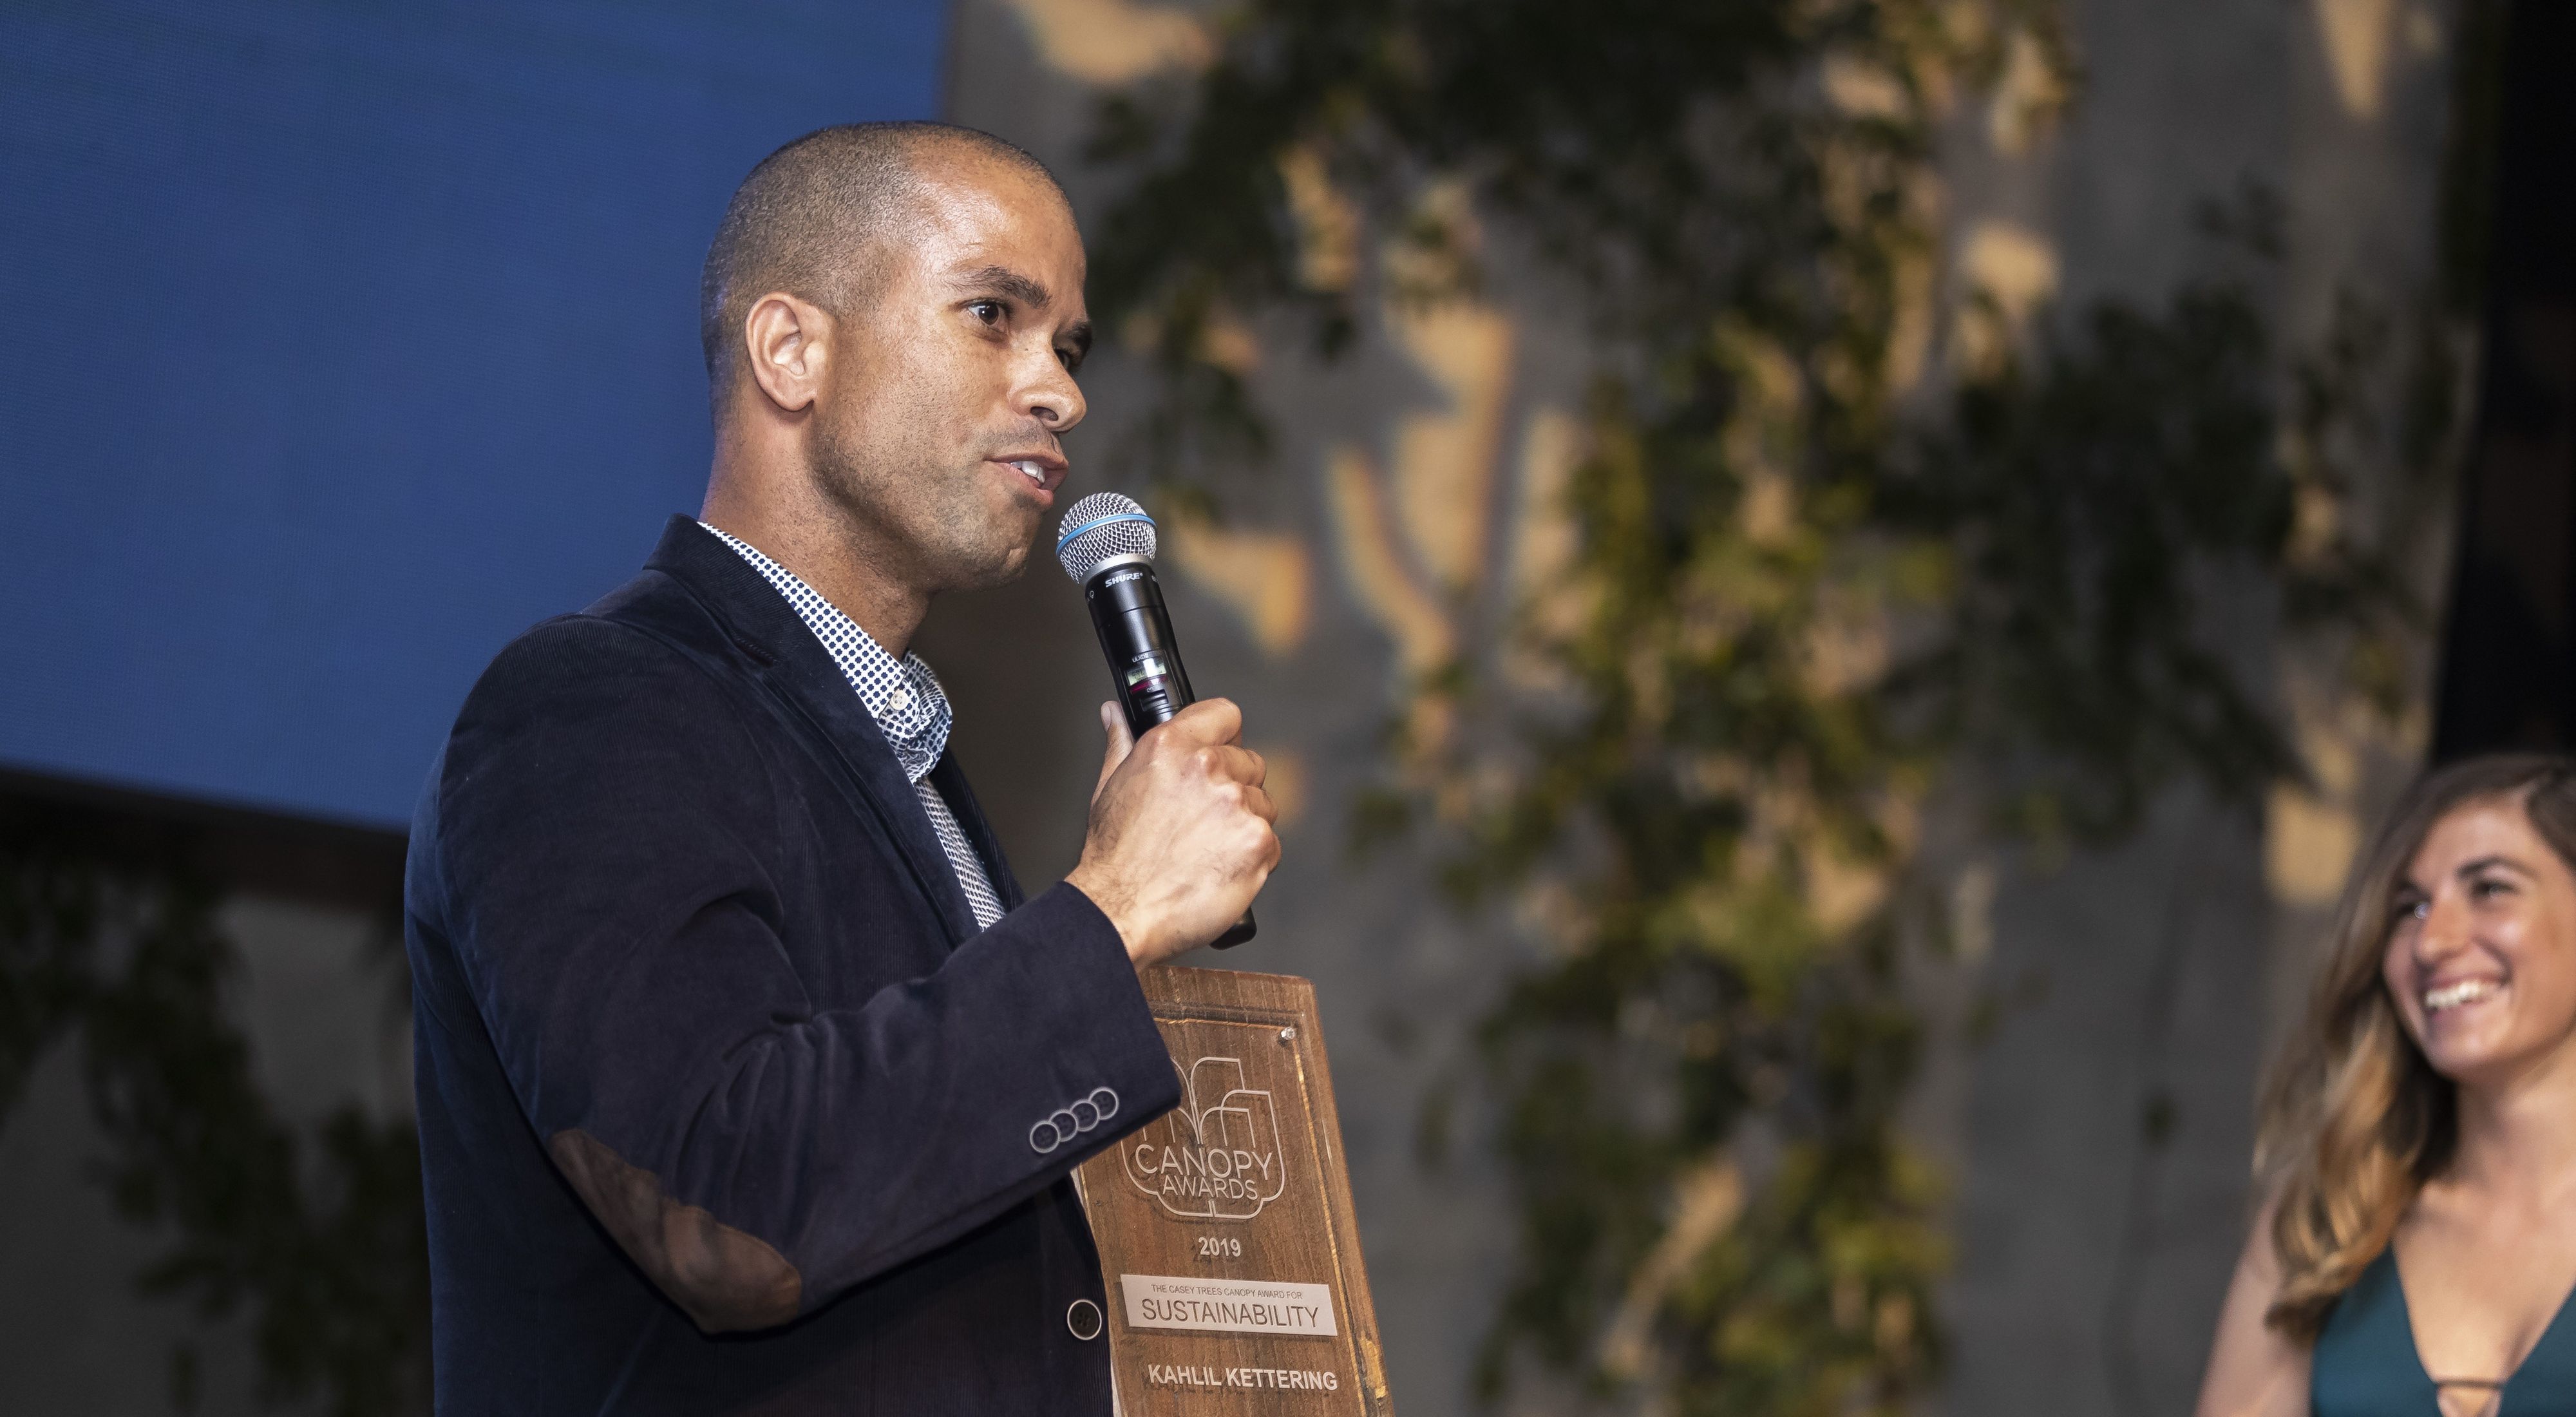  A person speaks into a microphone that they are holding and an award in the other hand.